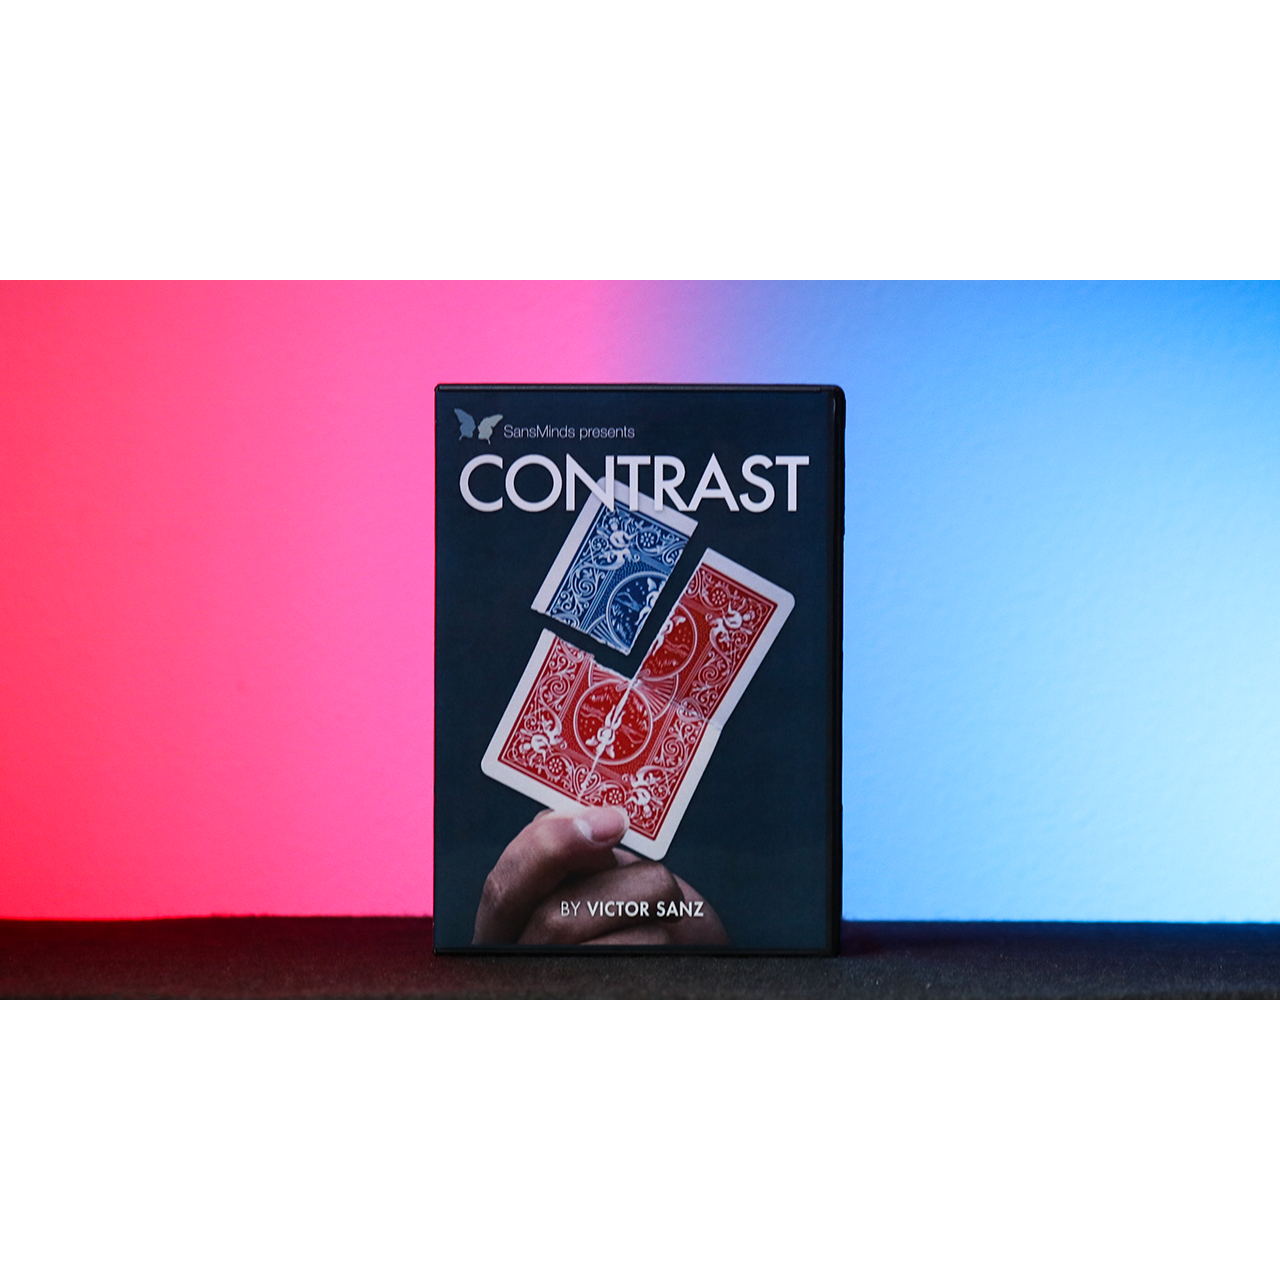 Contrast (DVD and Gimmick) by Victor Sanz and SansMinds DVD